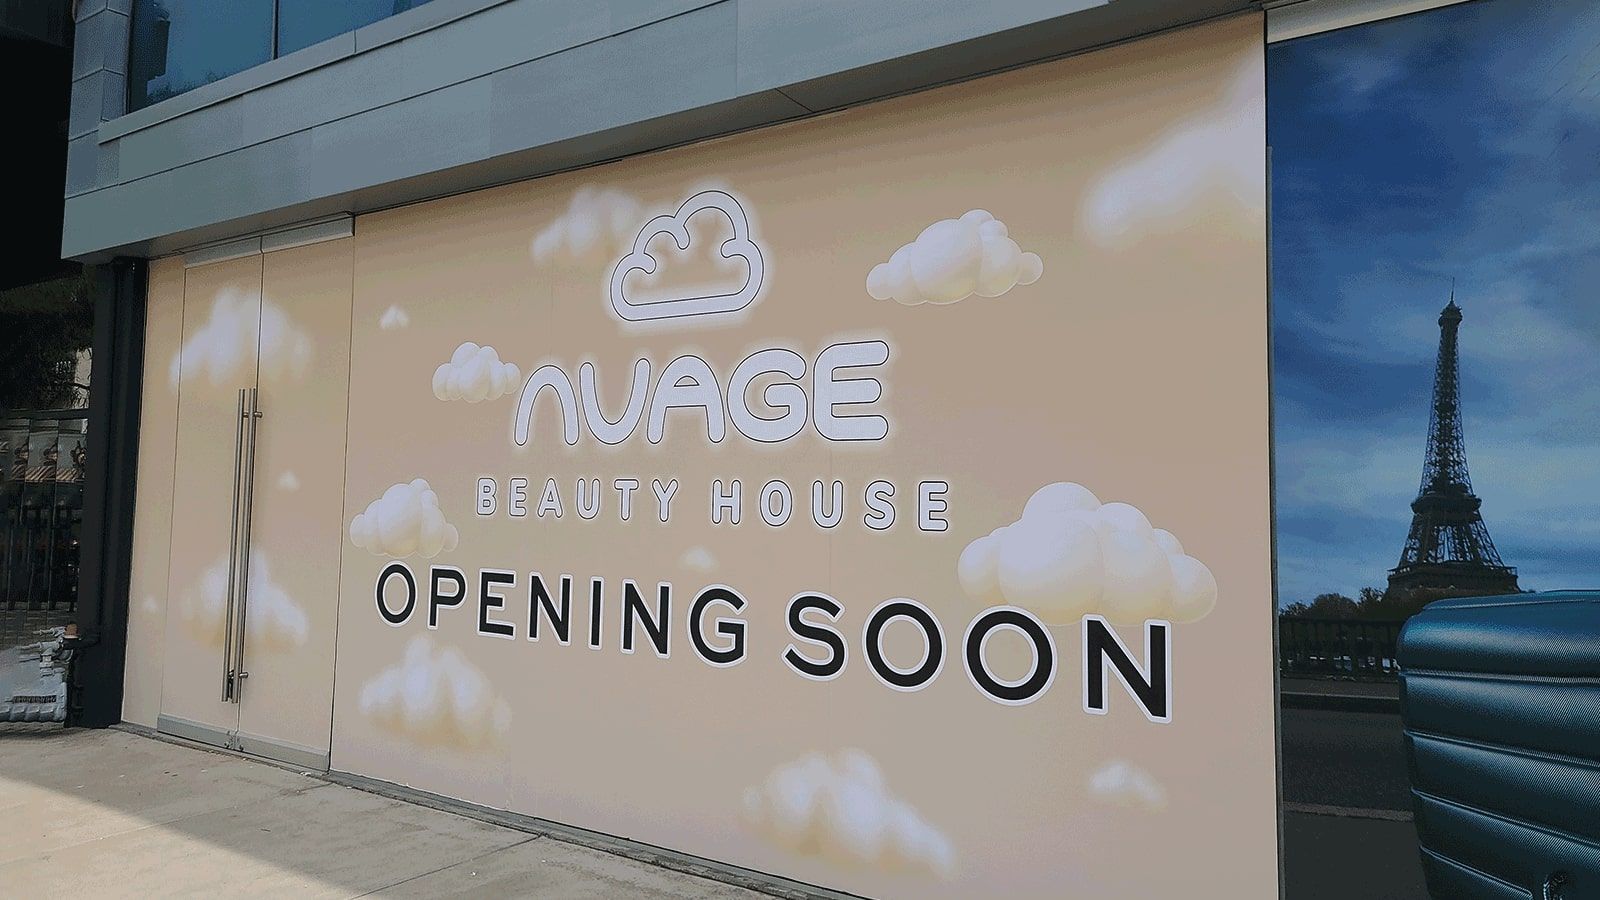 Nuage Beauty House custom decals applied to the storefront